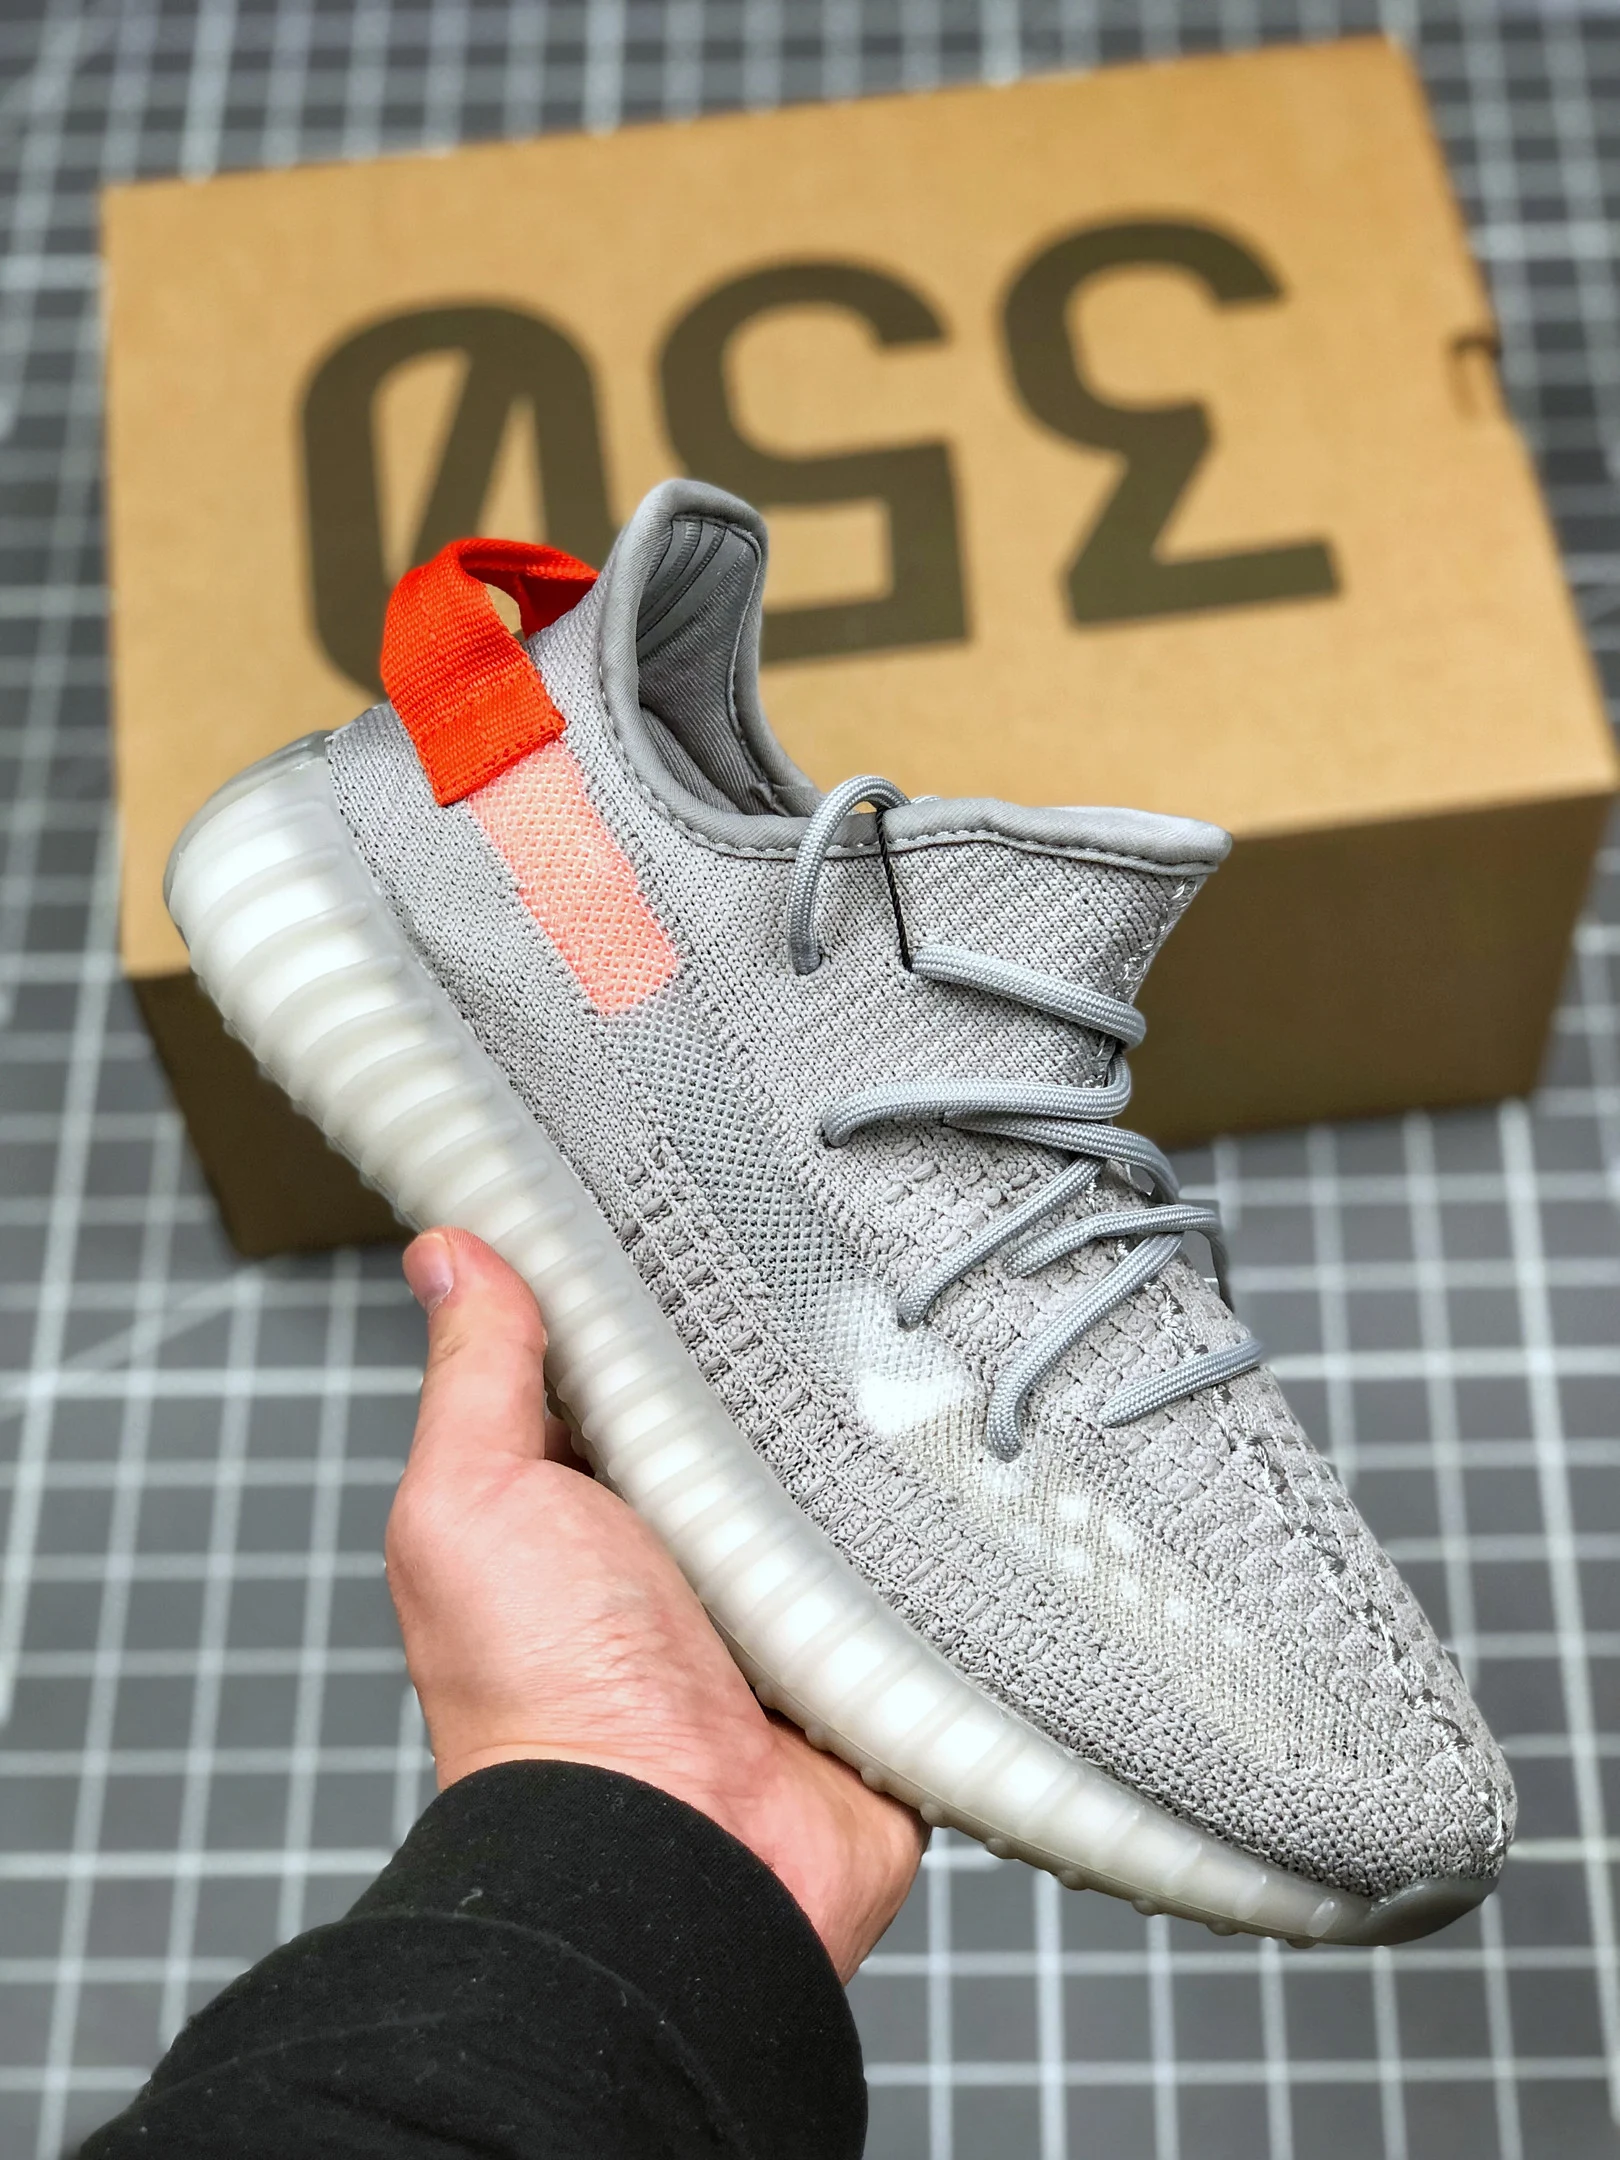 Adidas Yeezy Boost 350 v2 Tail Light FX9017 For Sale